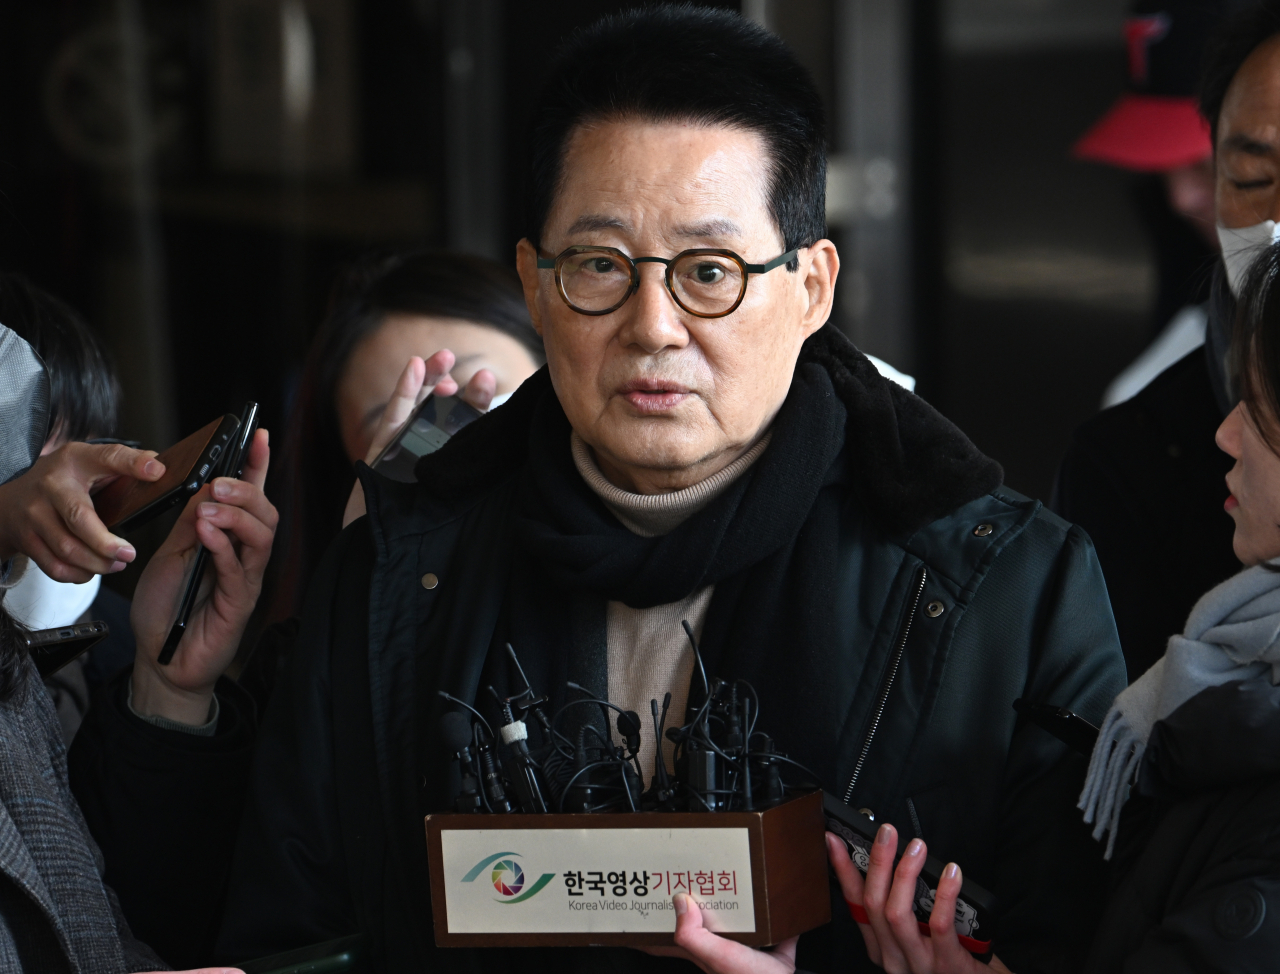 Park Jie-won, who served as the director of the National Intelligence Service from July 2020 to May 2022, speaks to reporters outside the Seoul central district prosecutors’ office on Dec. 14, 2022. (Im Se-jun/The Korea Herald)